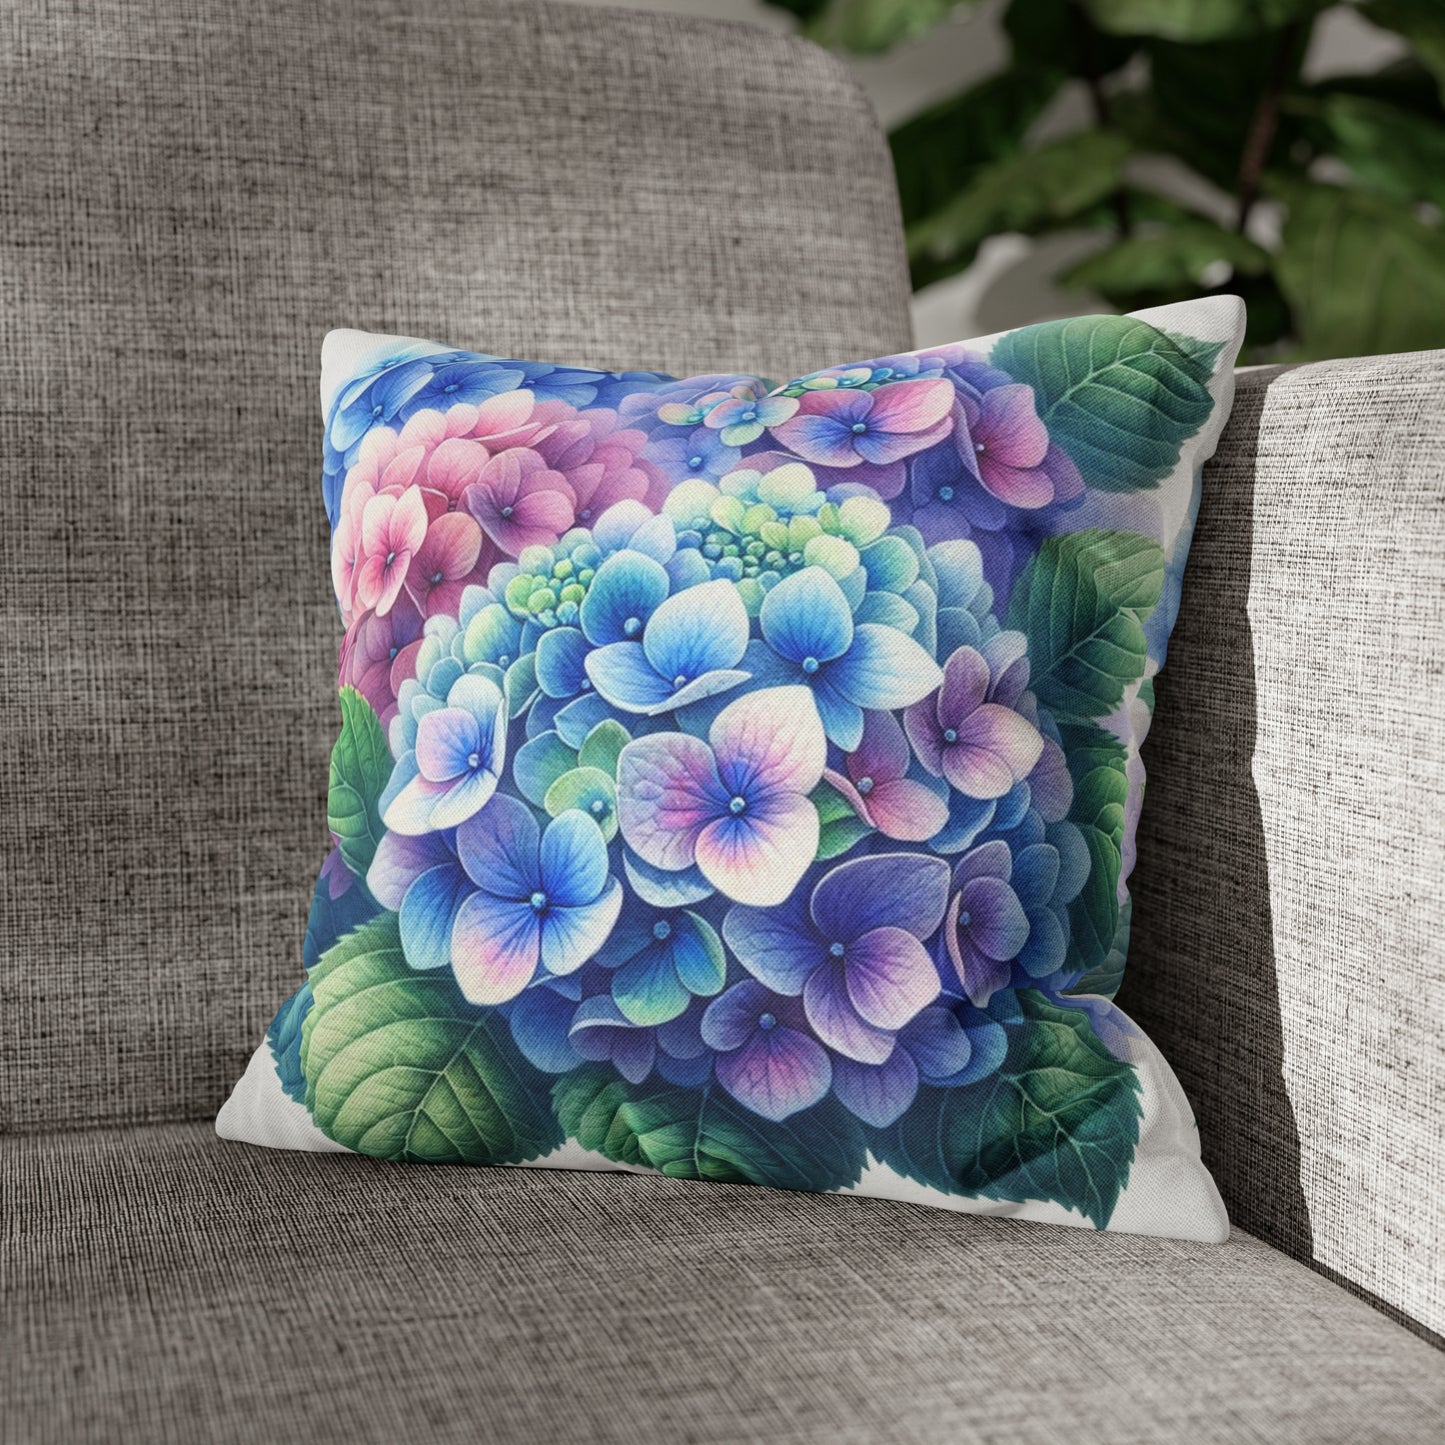 Blue Hydrangea Floral Pattern Pillow Cover, Pink Flowers Watercolor Square Throw Decorative Cover Floor Couch Cushion 20 x 20 Zipper Sofa